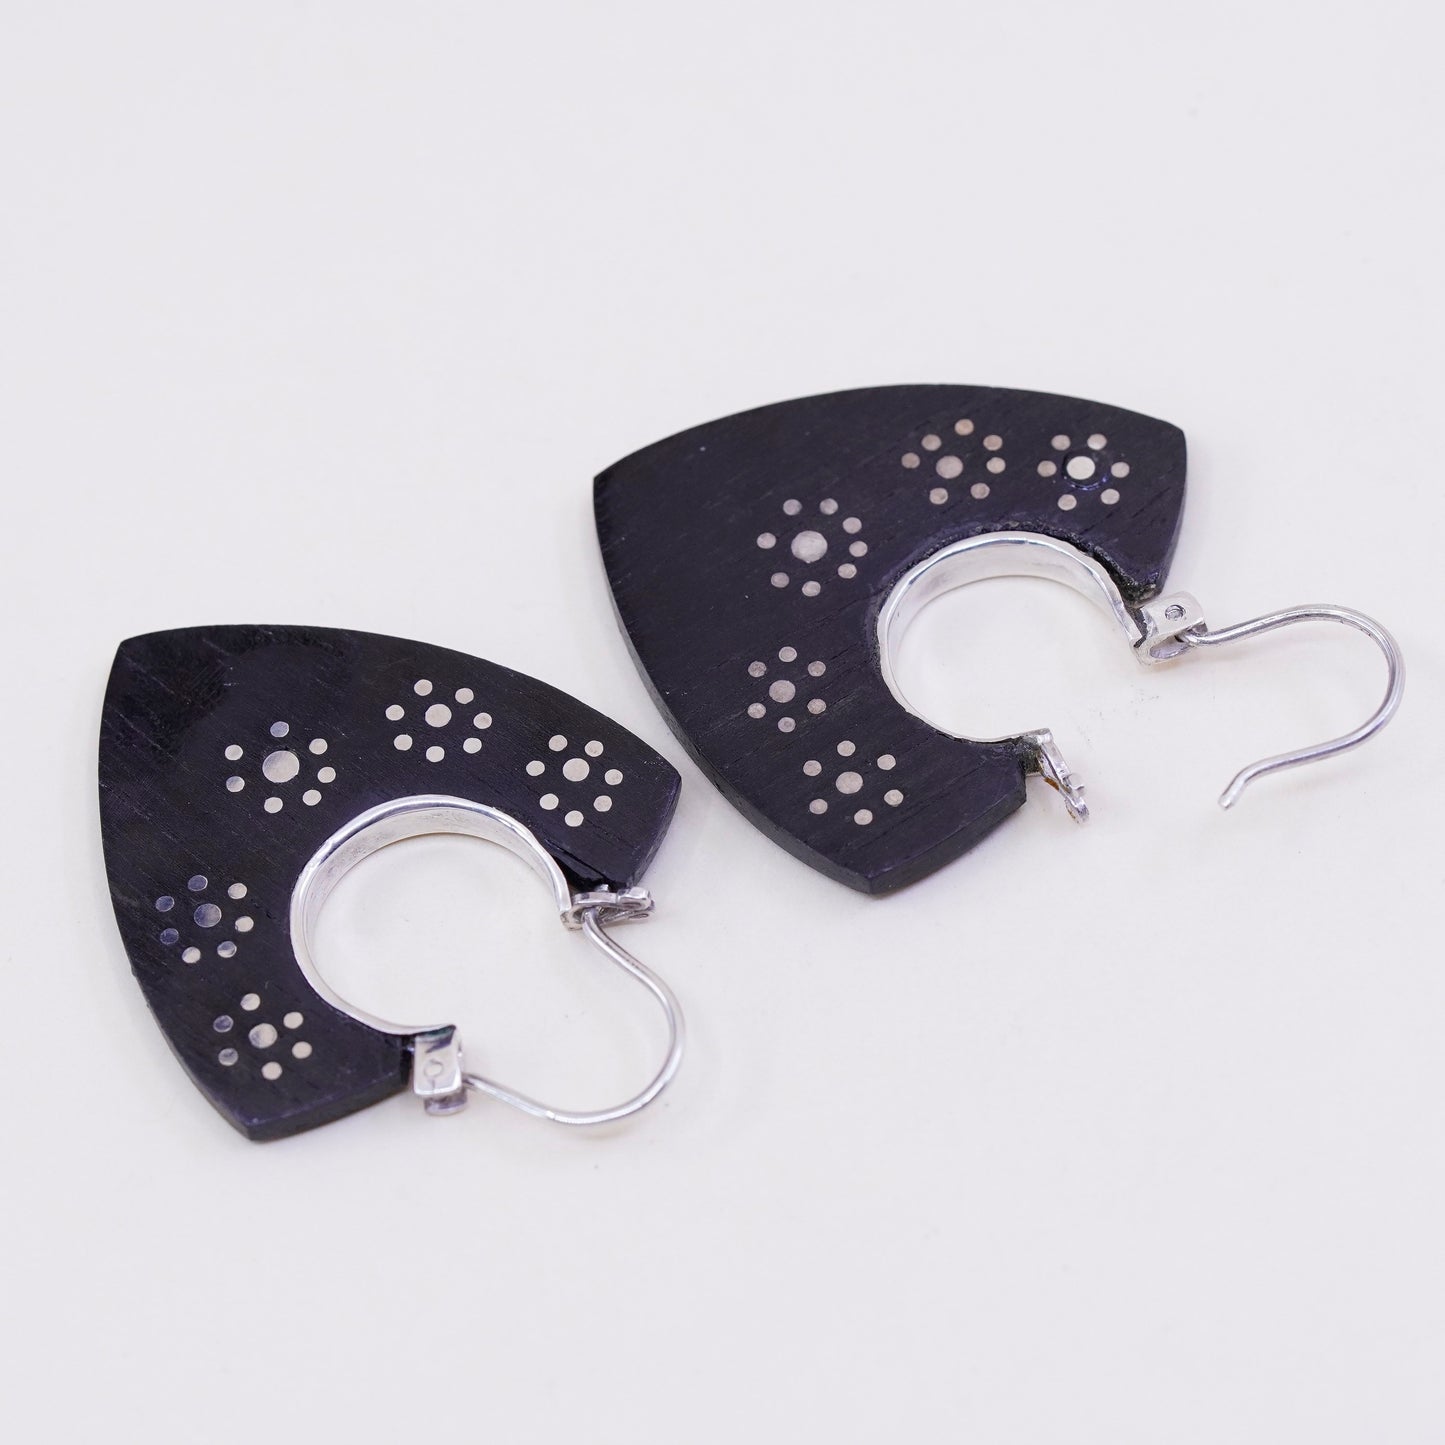 Vintage sterling 925 silver handmade earrings with black wood and flower dots